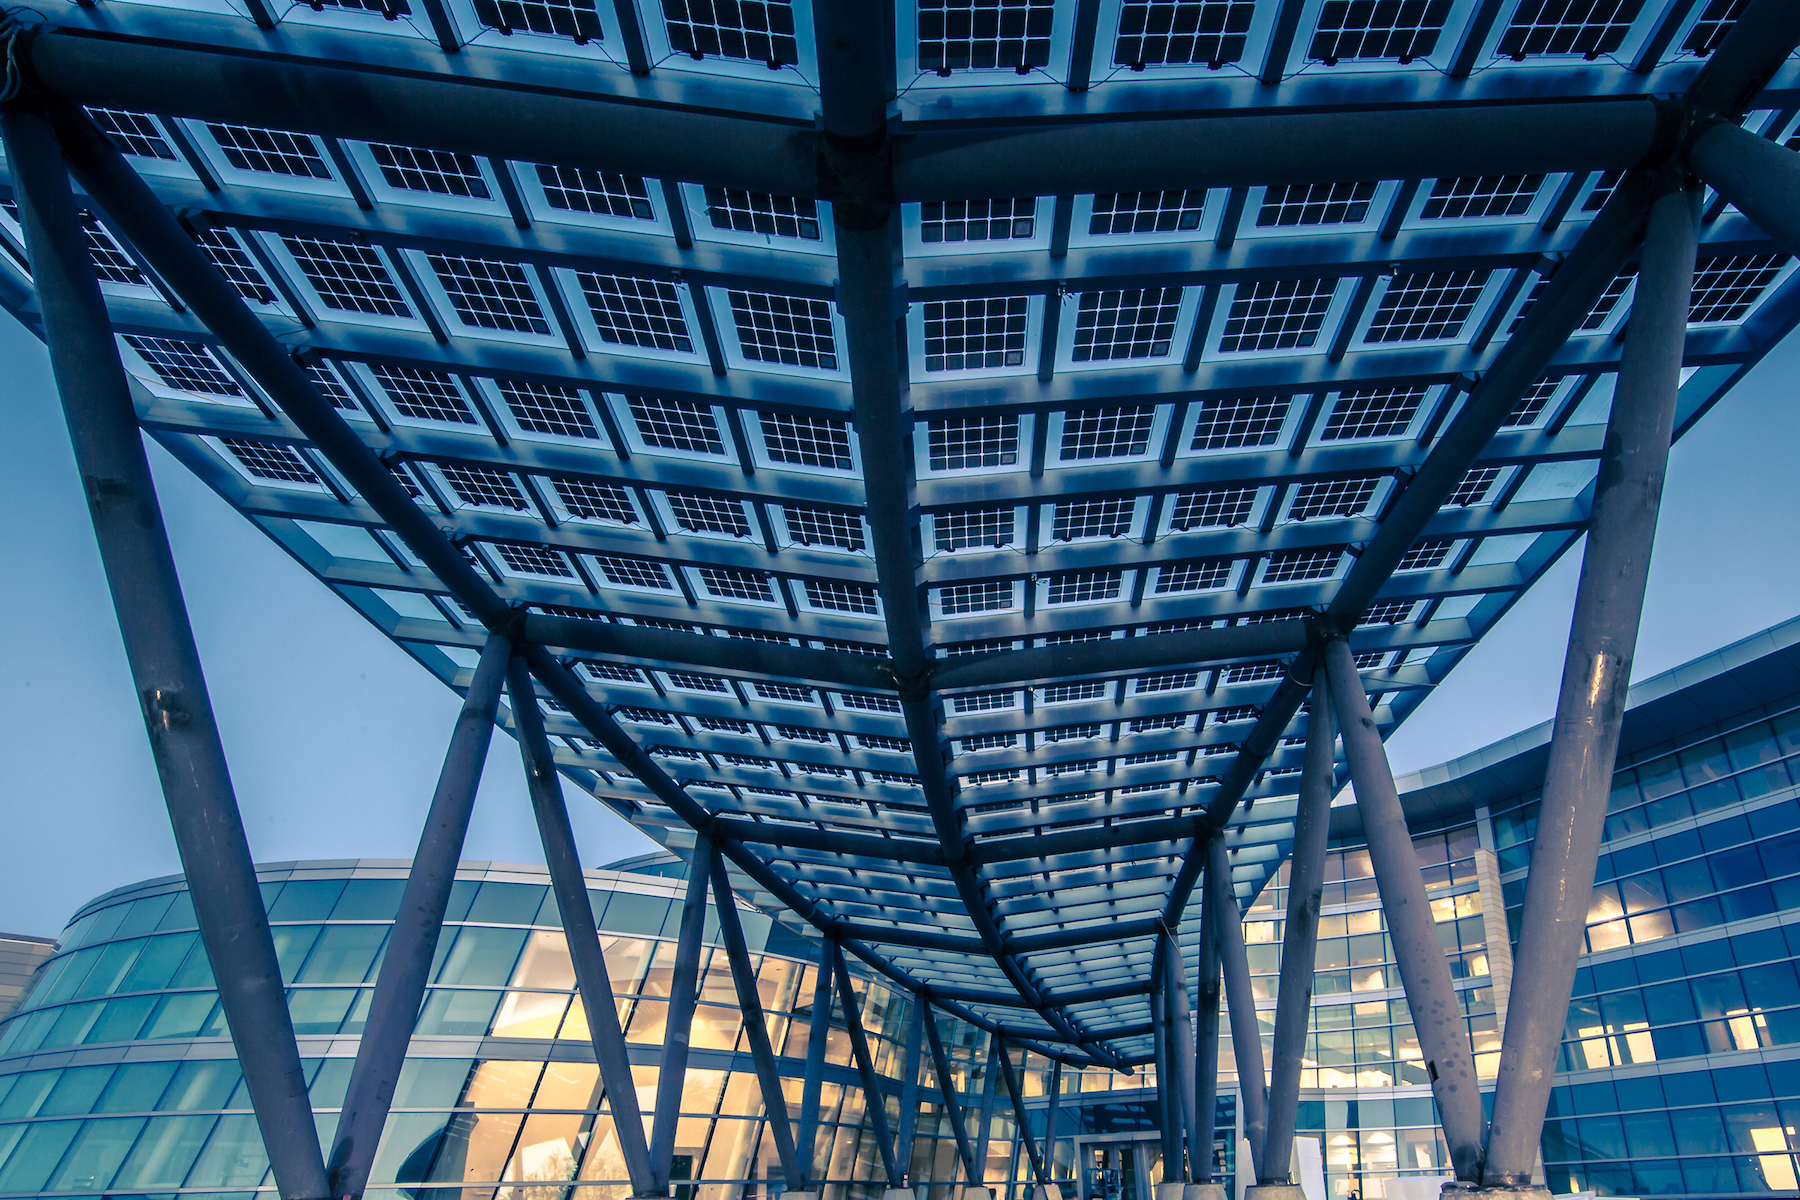 BIPV glass modules can be used with virtually any glass substrate or low-e coating to achieve desired aesthetics. Photo courtesy of Vitro Architectural Glass